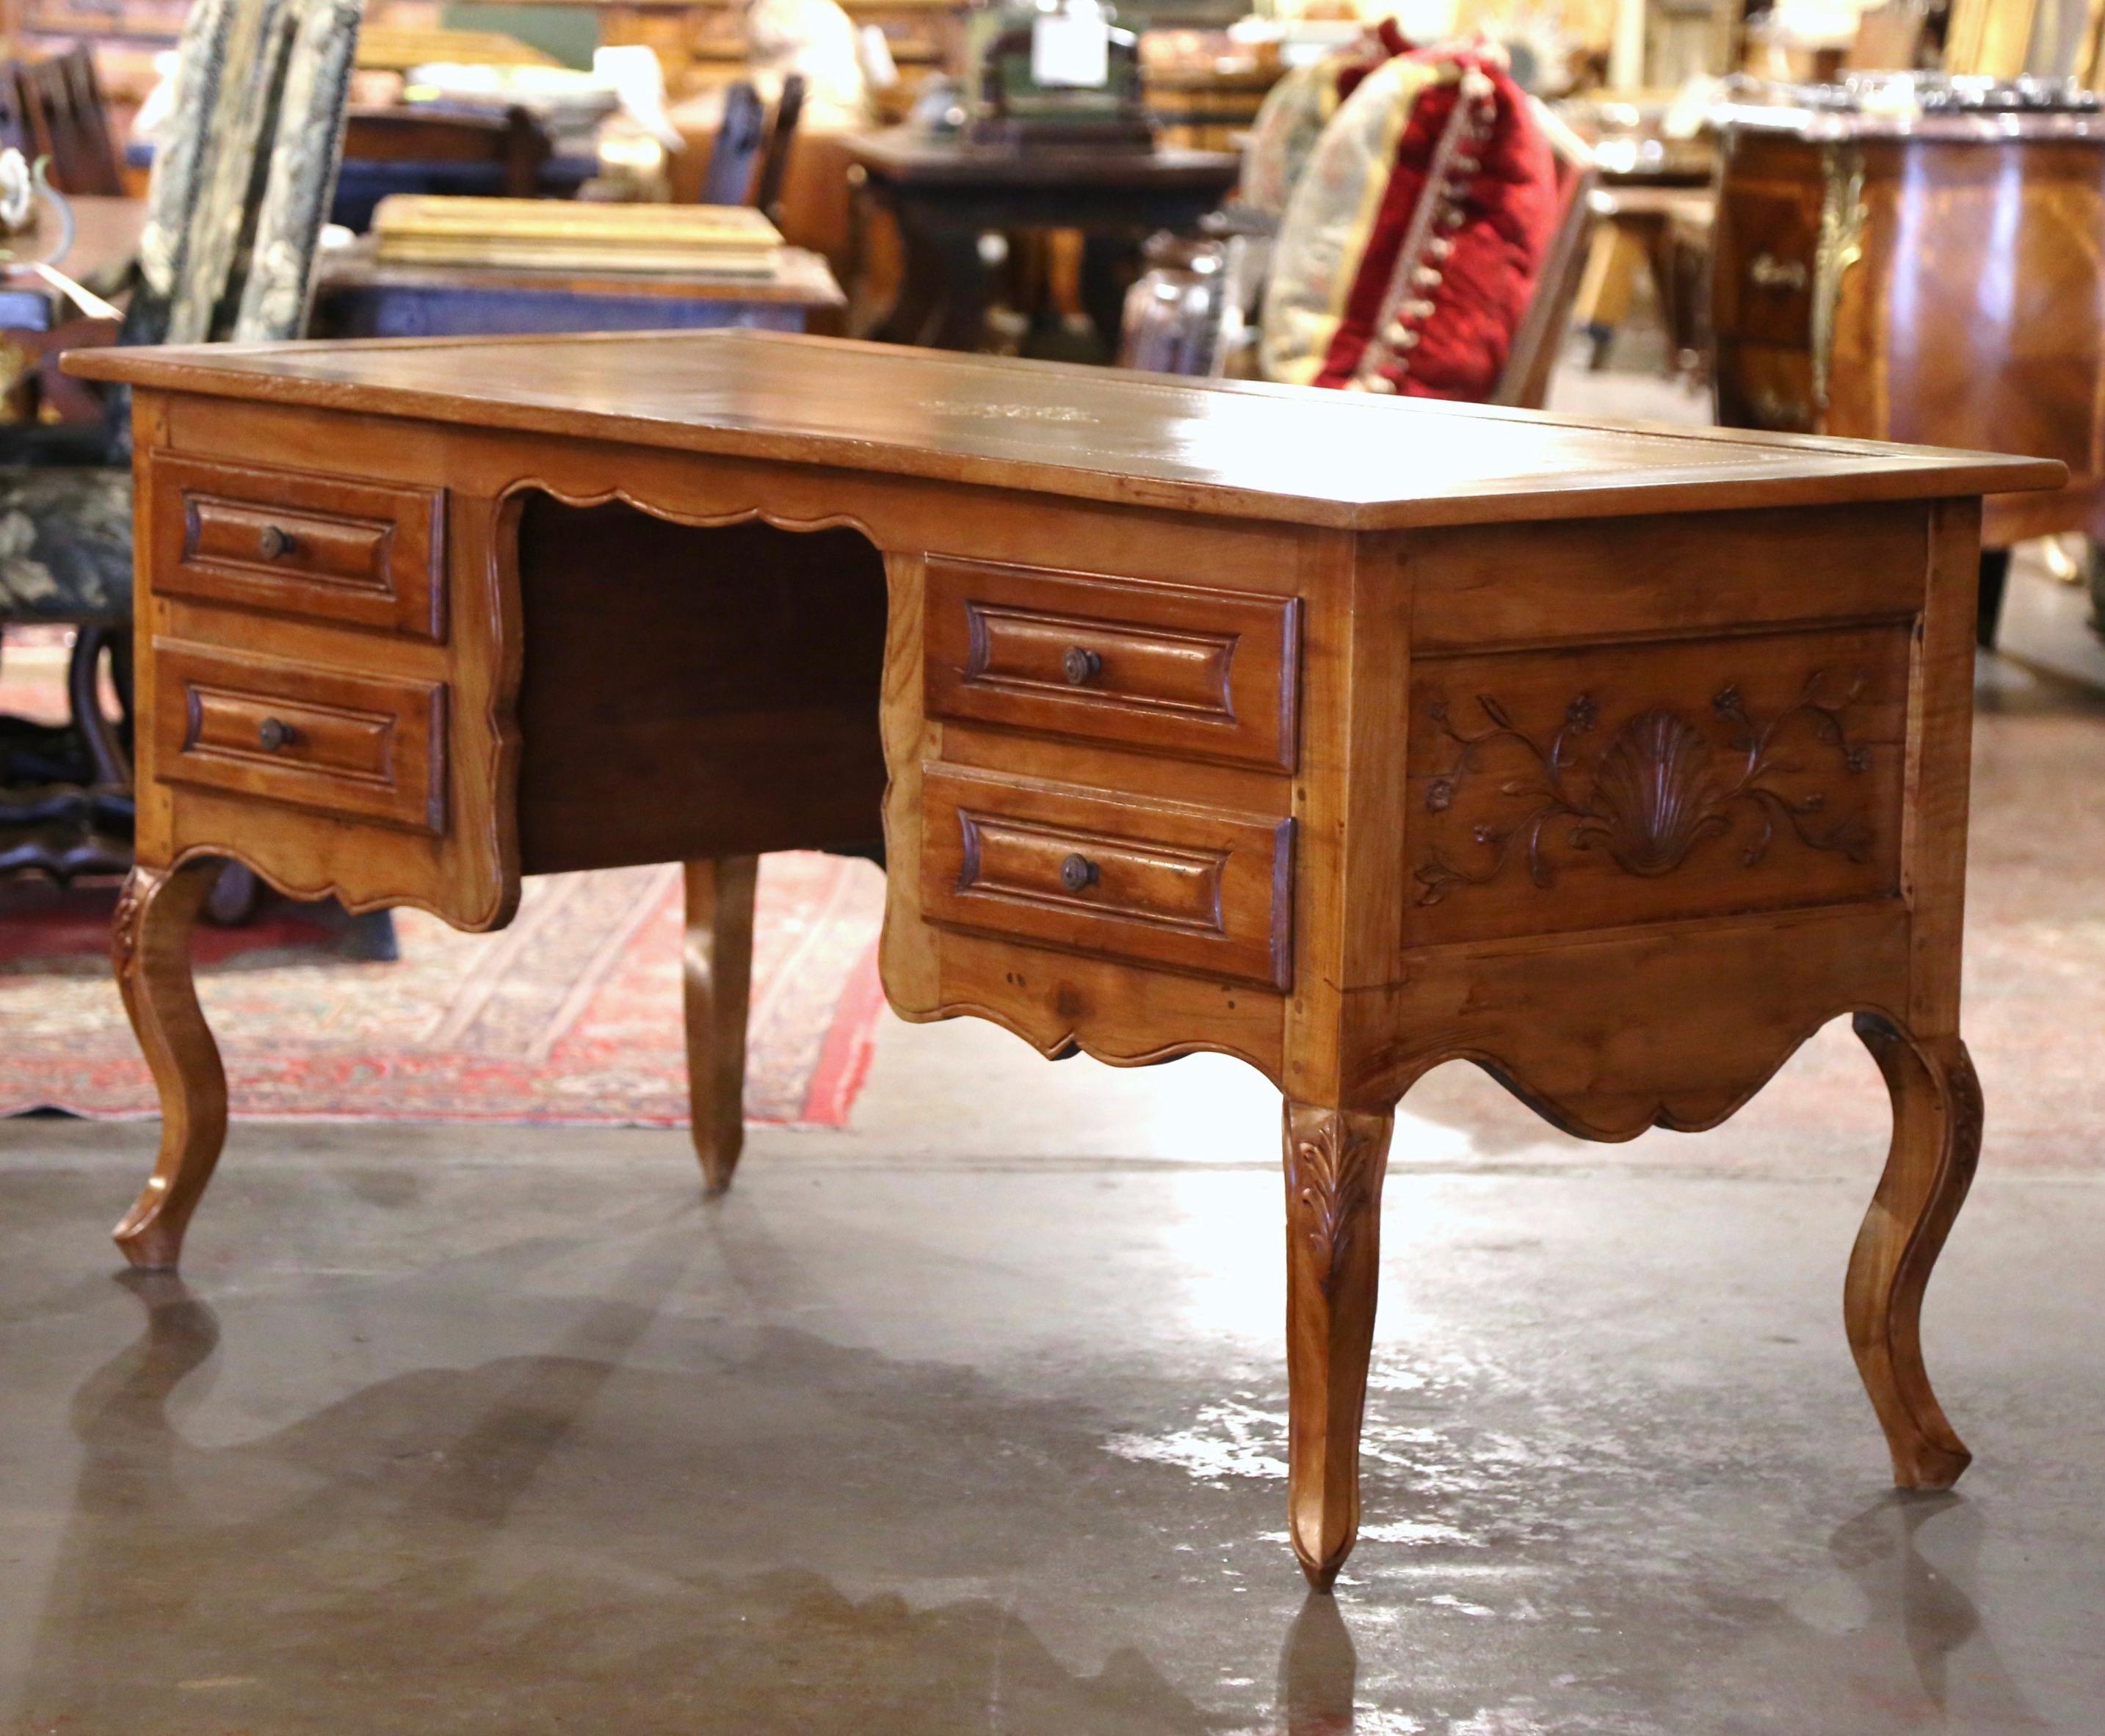 This elegant antique fruitwood desk was created in the Poitou region of France, circa 1890. Made of wild cherry timber, the large writing table sits on four cabriole legs decorated with acanthus leaves at the shoulder, over a decorative scalloped